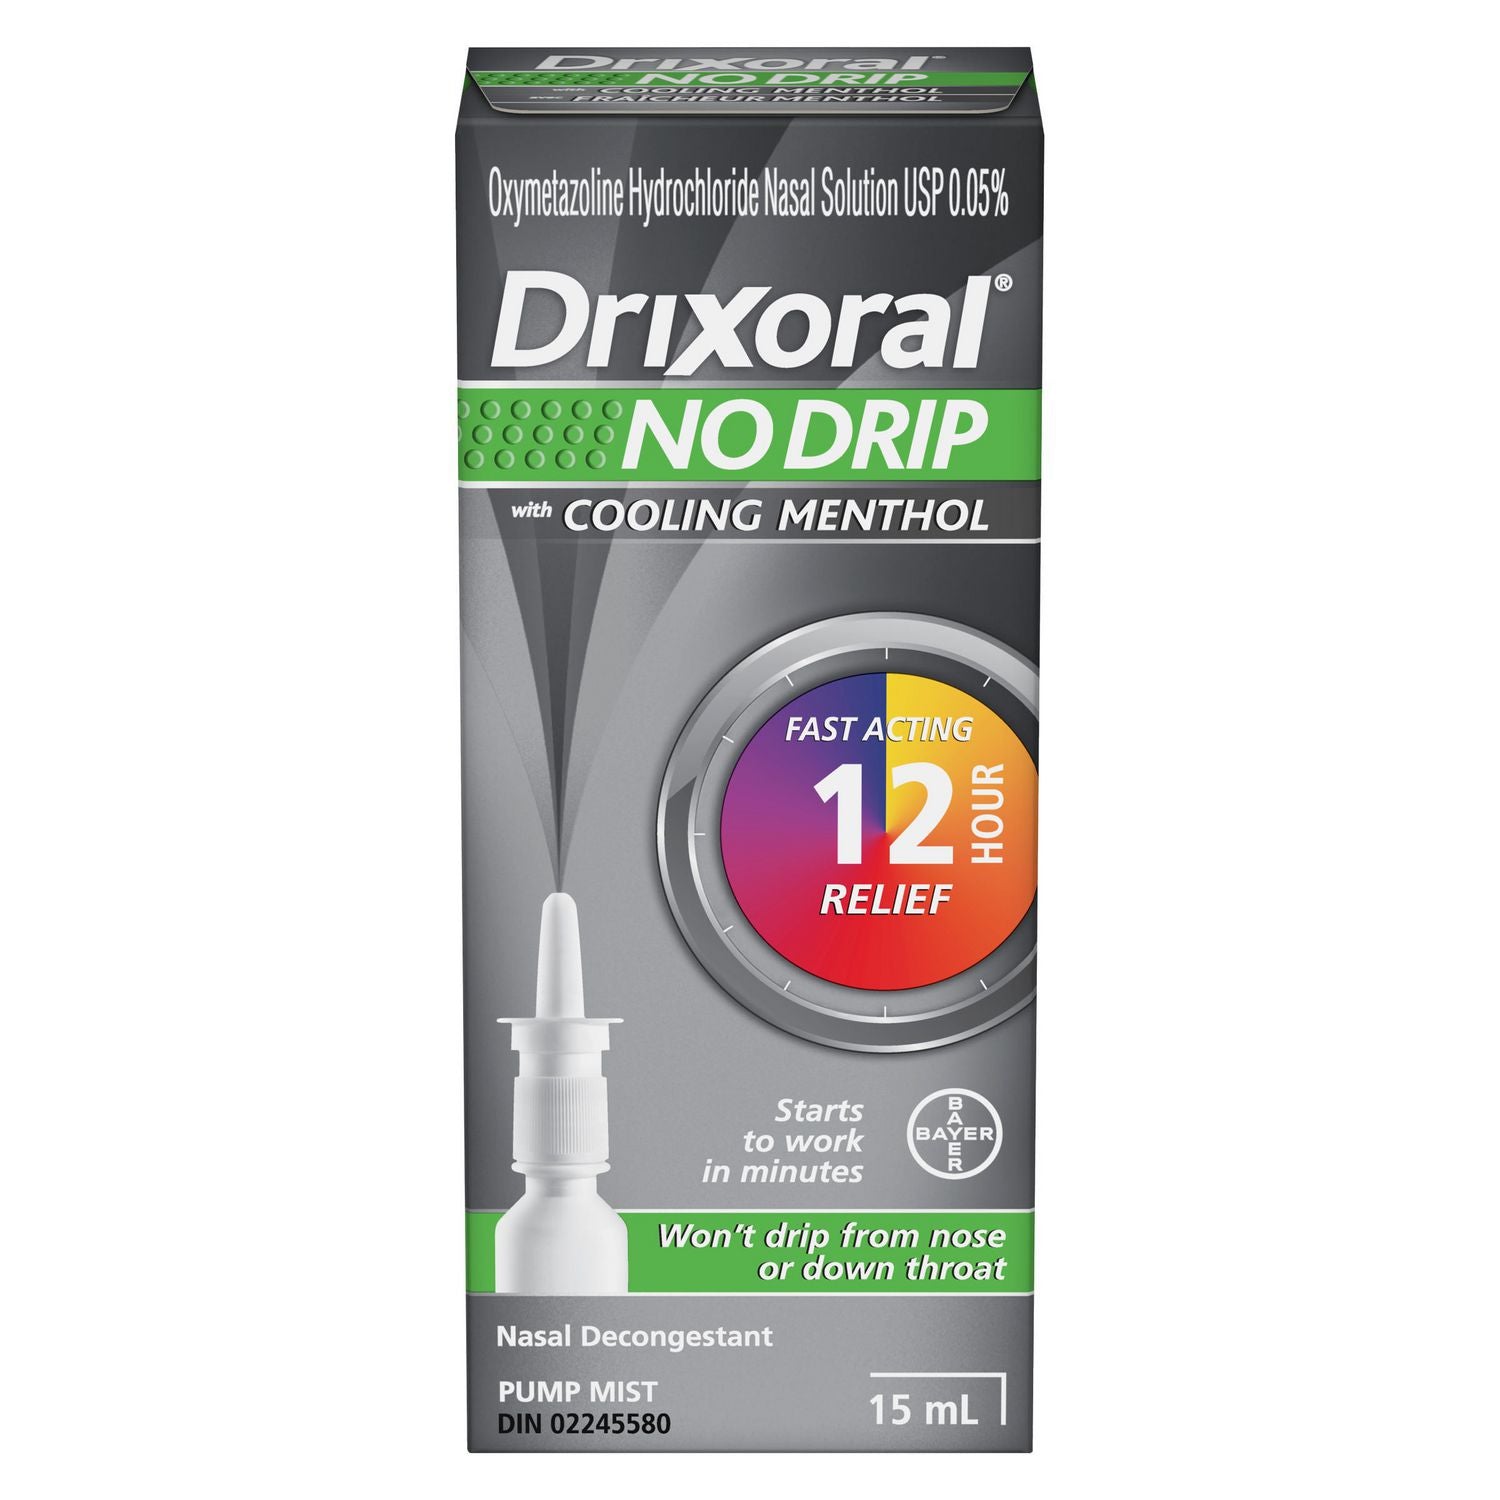 Drixoral No Drip with Cooling Menthol 15mL